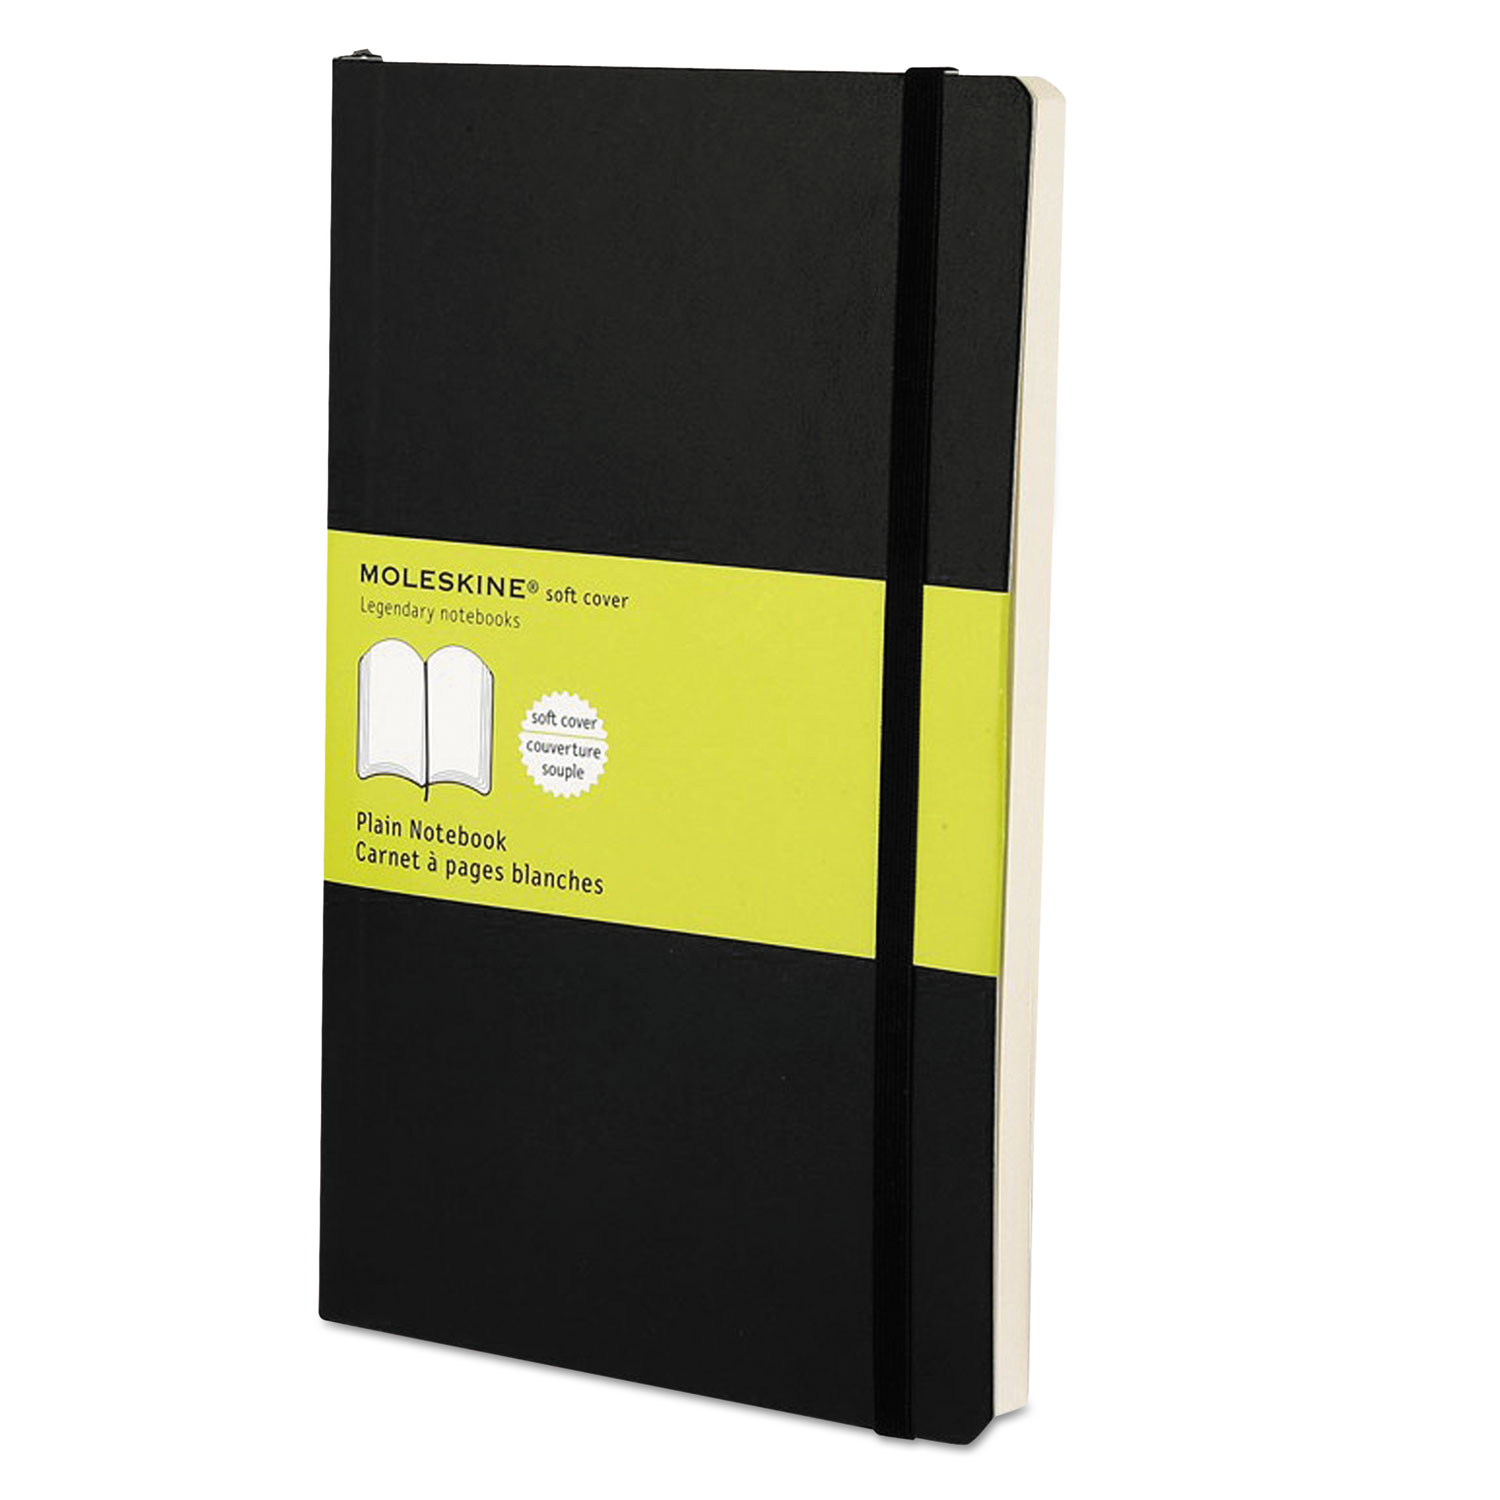  Moleskine 9788883707209 Classic Softcover Notebook, 1 Subject, Unruled, Black Cover, 8.25 x 5, 192 Sheets (HBGMSL17) 